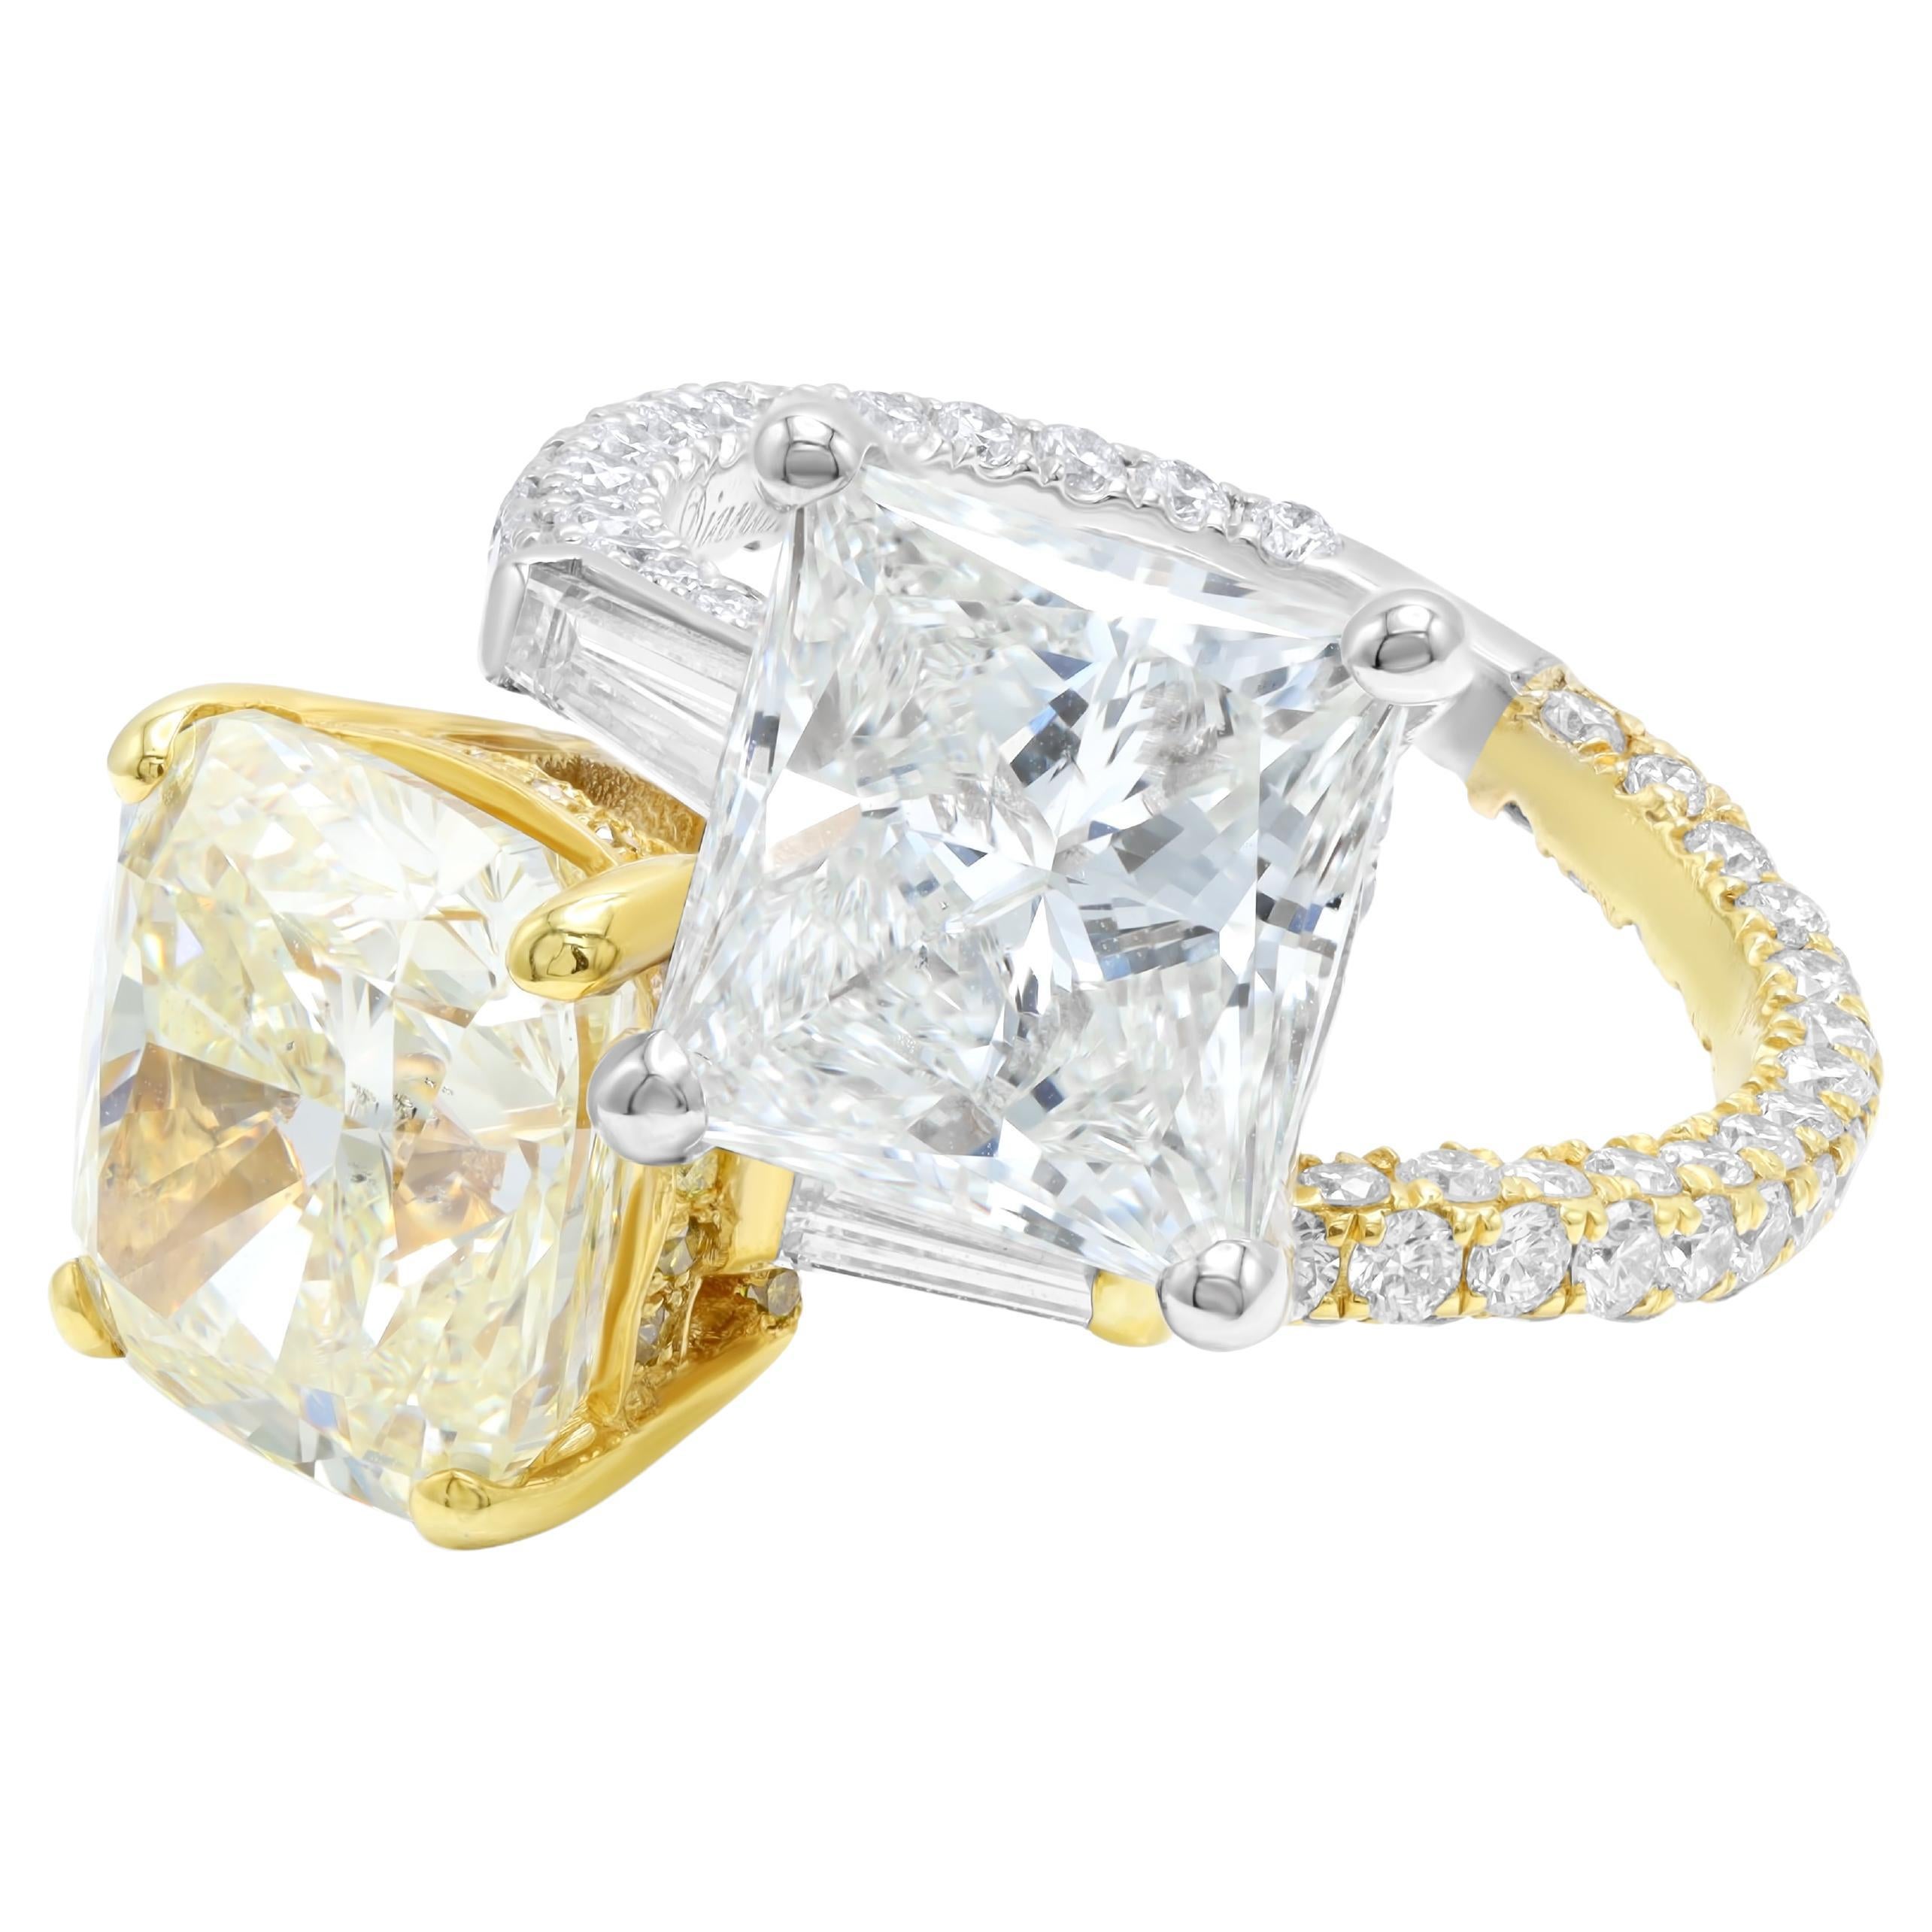 Diana M. Princess Cut 4.01ct I SI1 and 5.24ct Yellow Diamond Cocktail Ring  For Sale